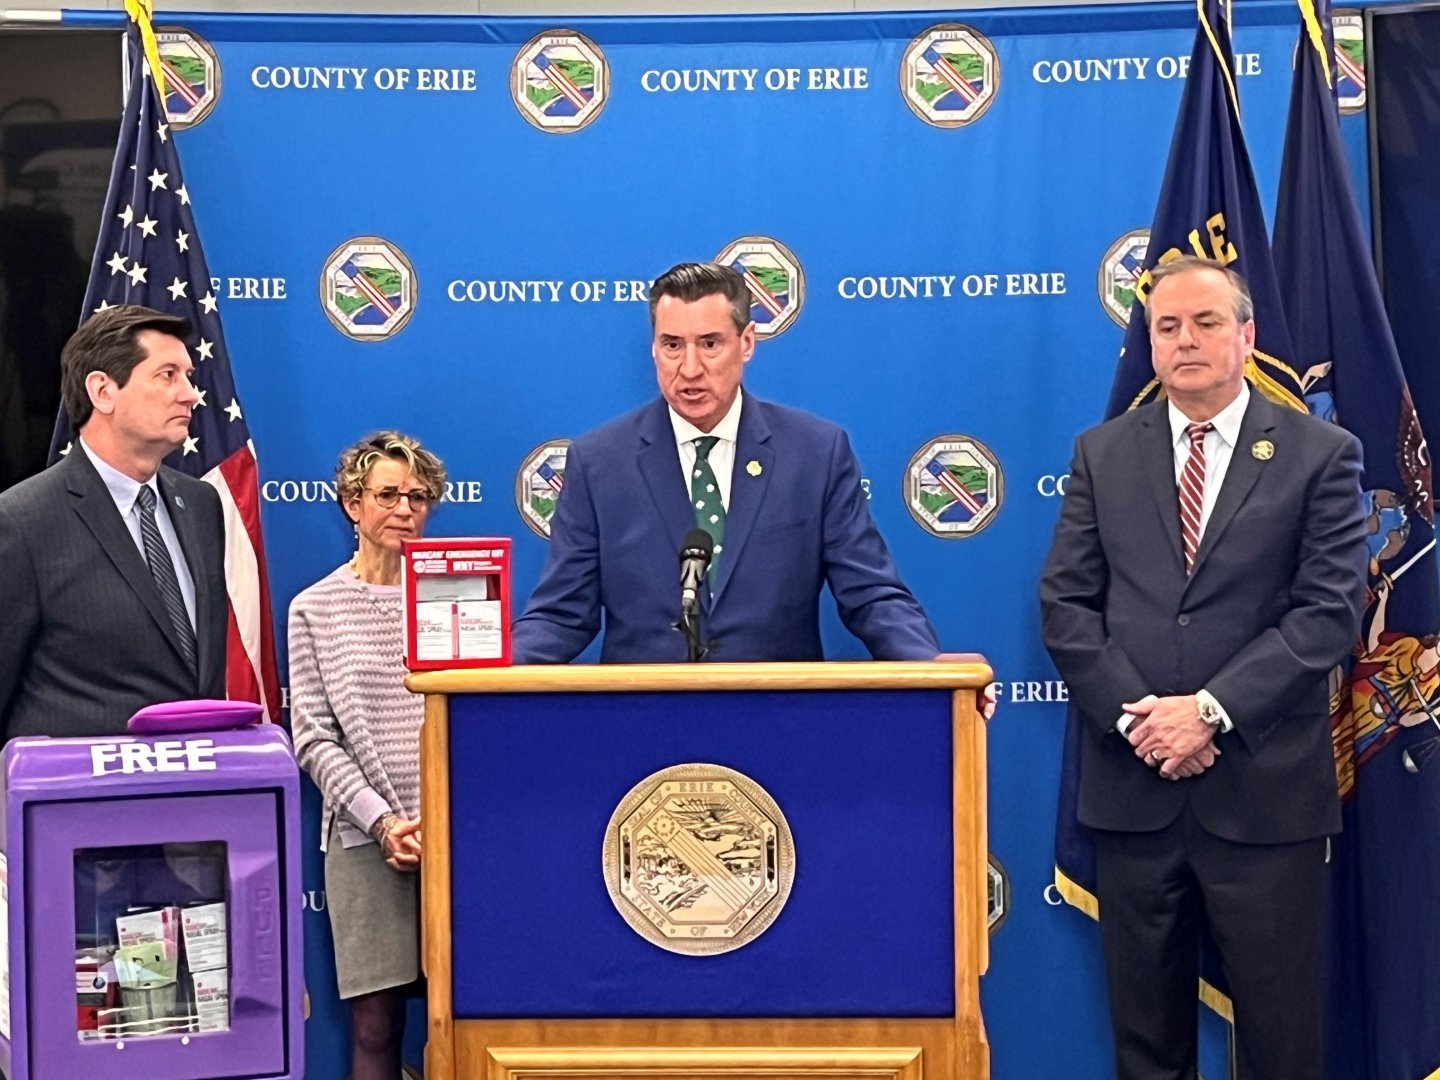 DA Flynn joins County Executive Poloncarz, County Health Commissioner Dr. Burstein and Sheriff Garcia to warn about an increase in opioid overdose deaths.